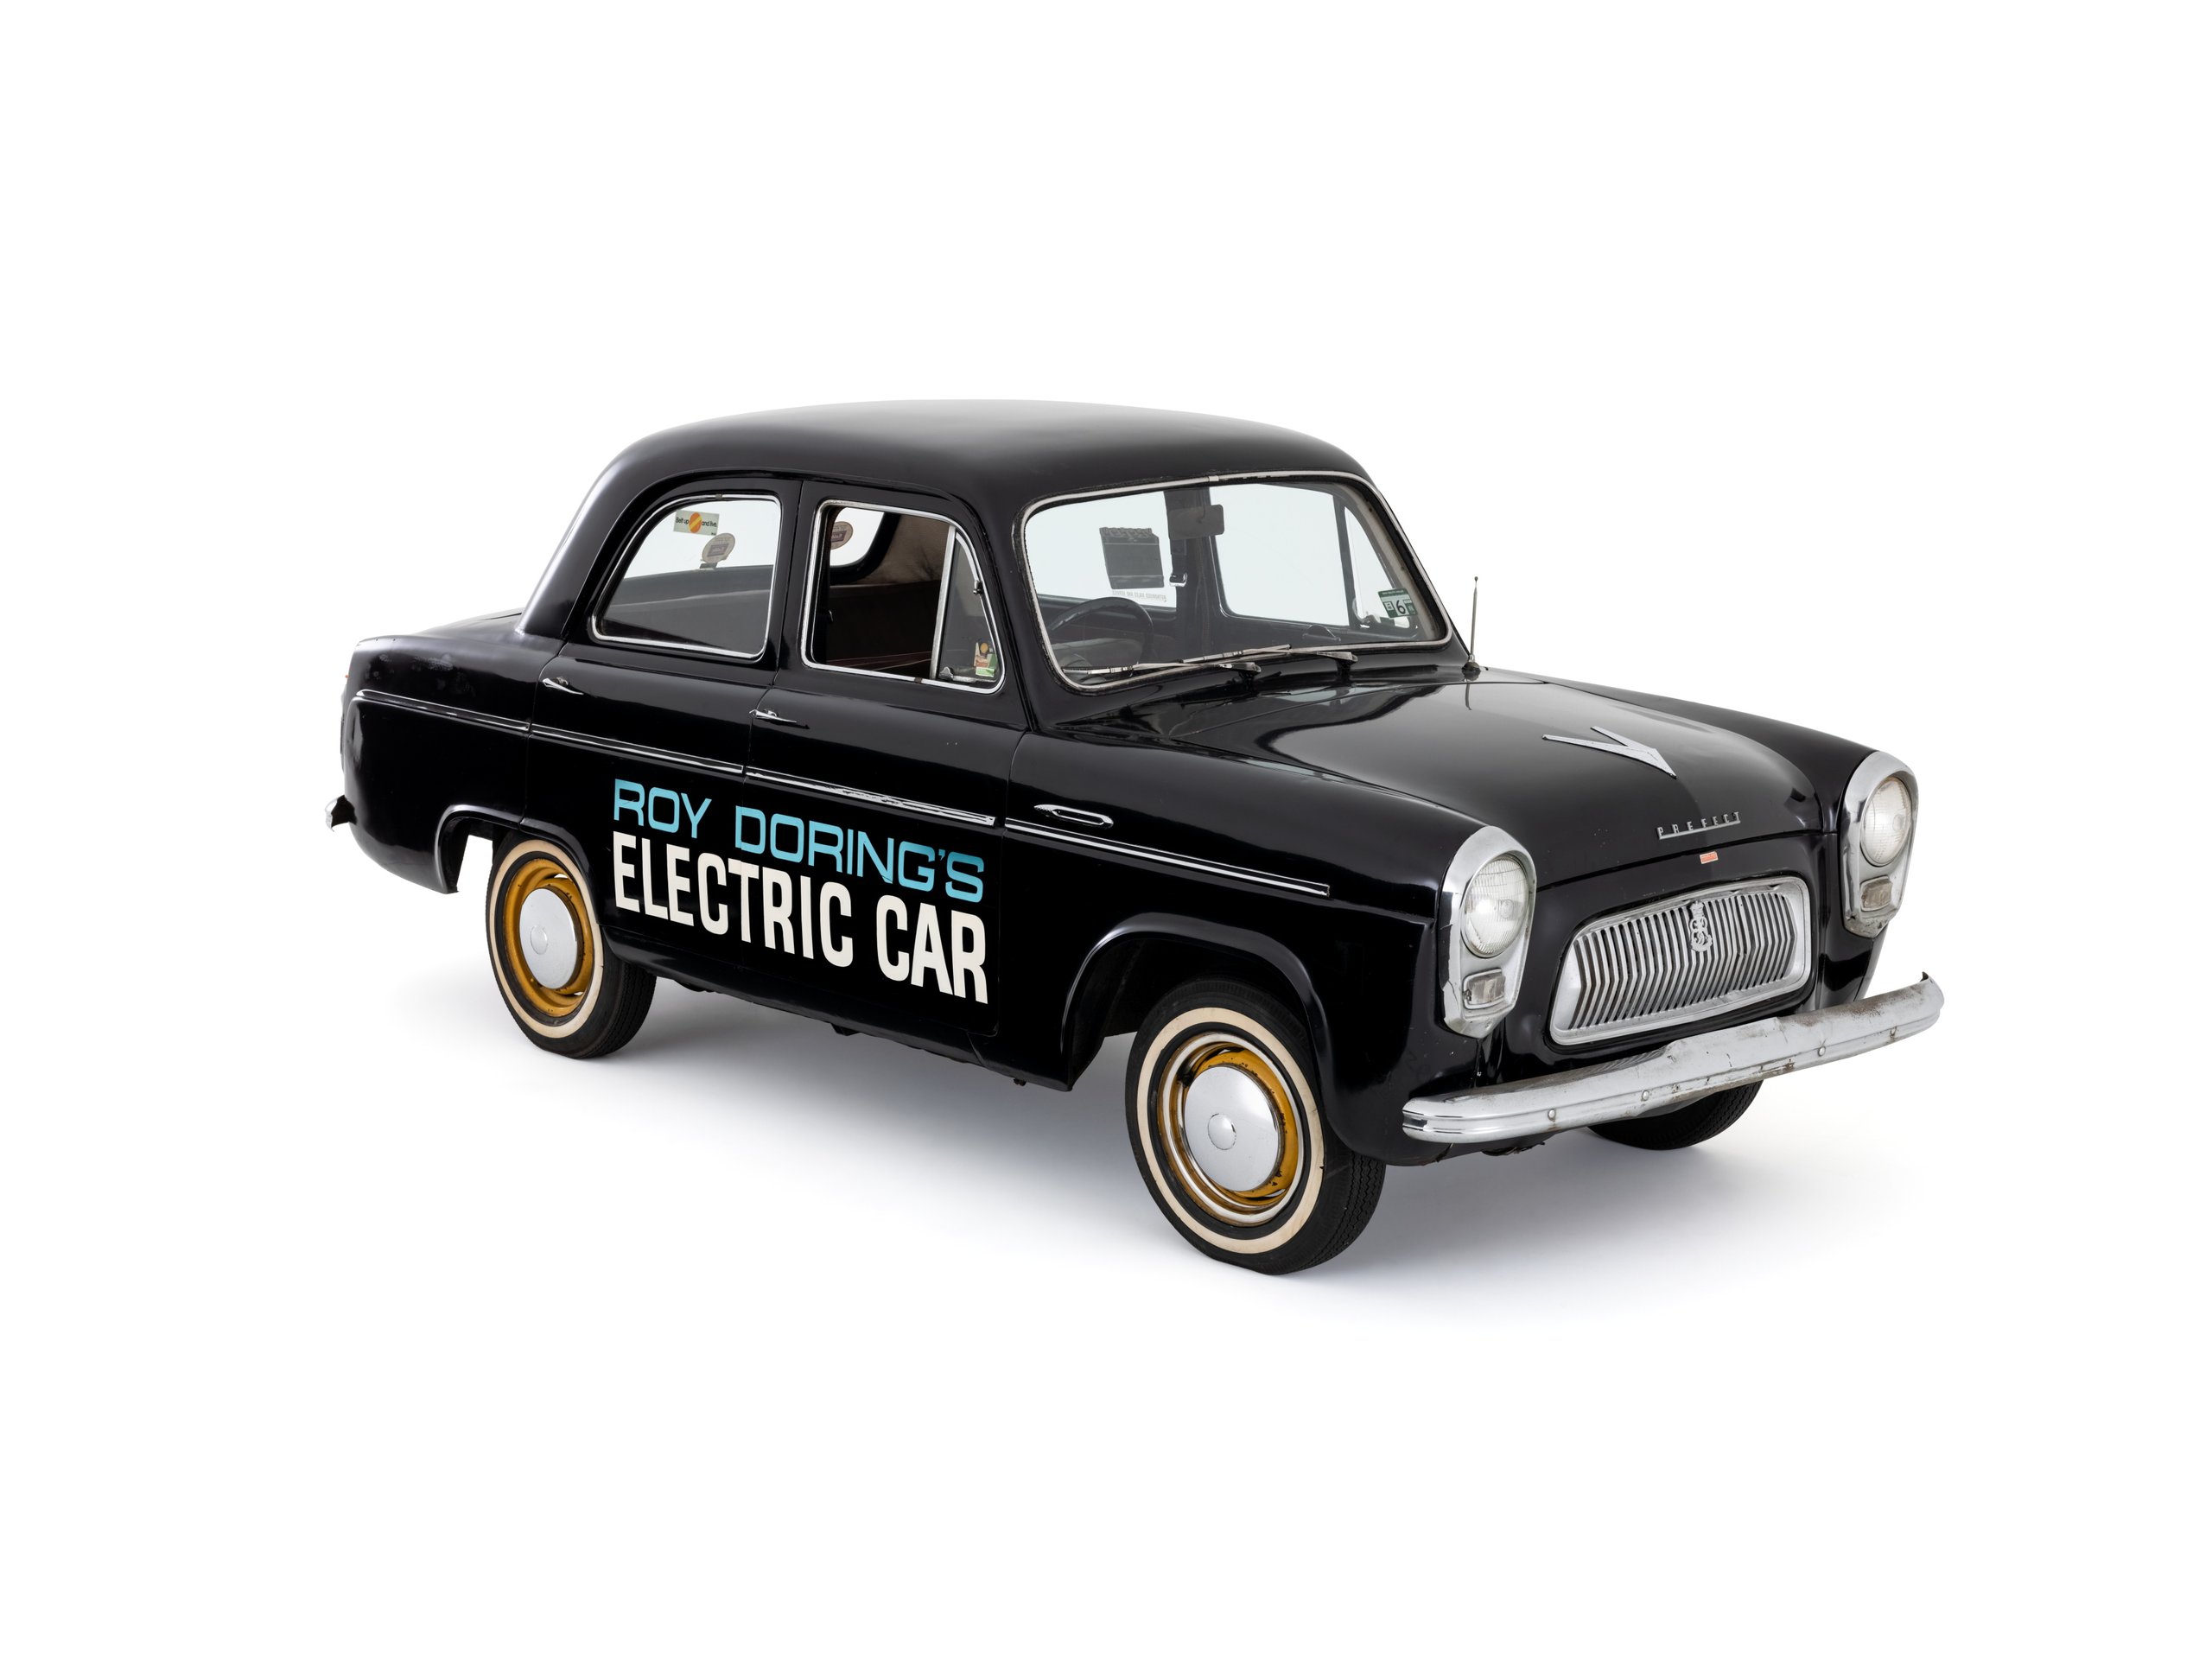 1959 Ford Prefect model 100E converted to electric power